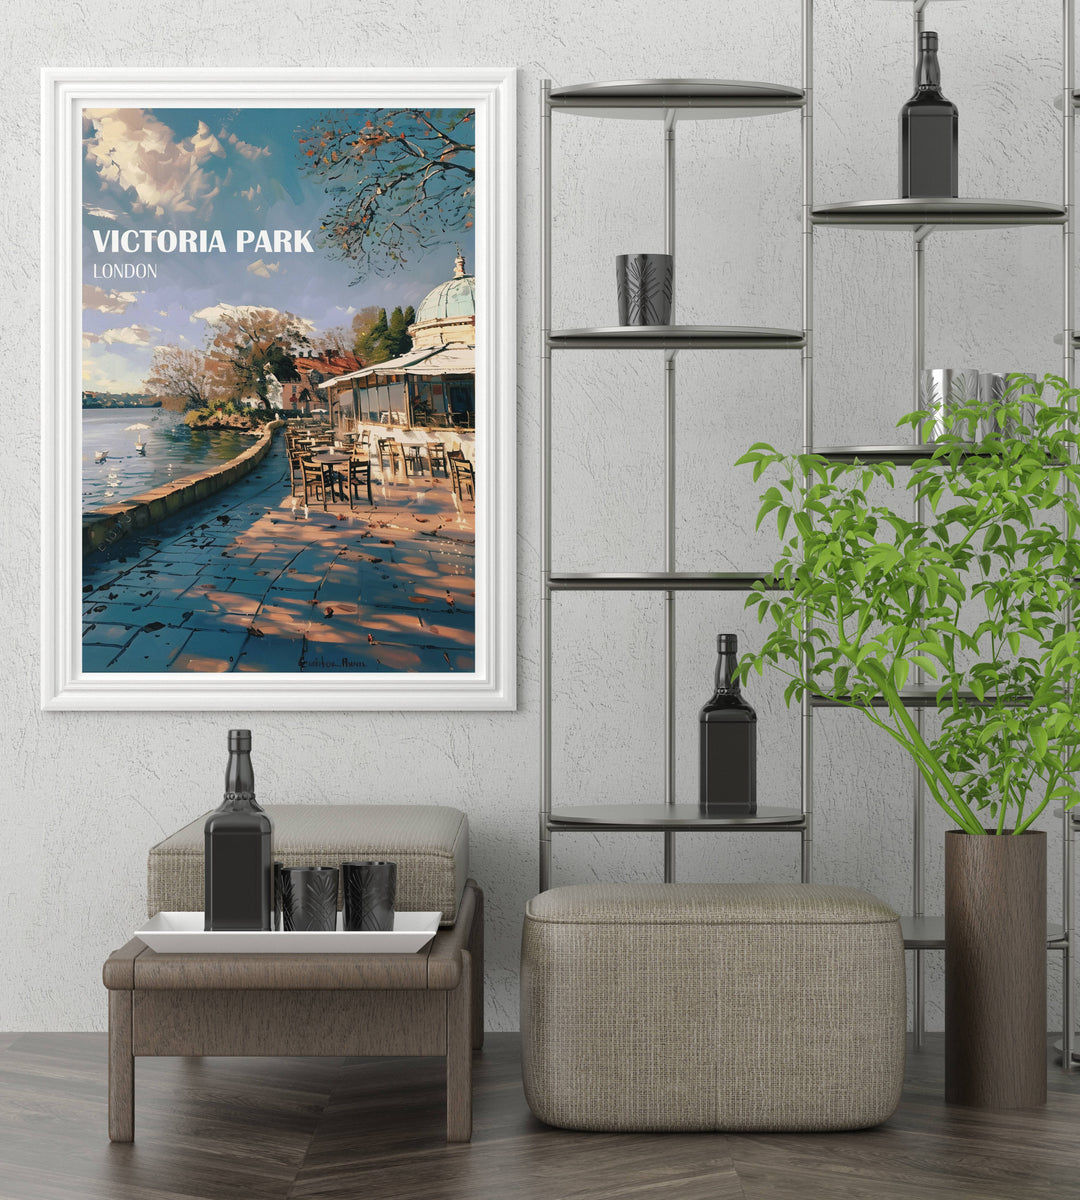 Custom print of Victoria Parks The Pavillion Café, ideal for adding a touch of Londons elegance to your home decor.